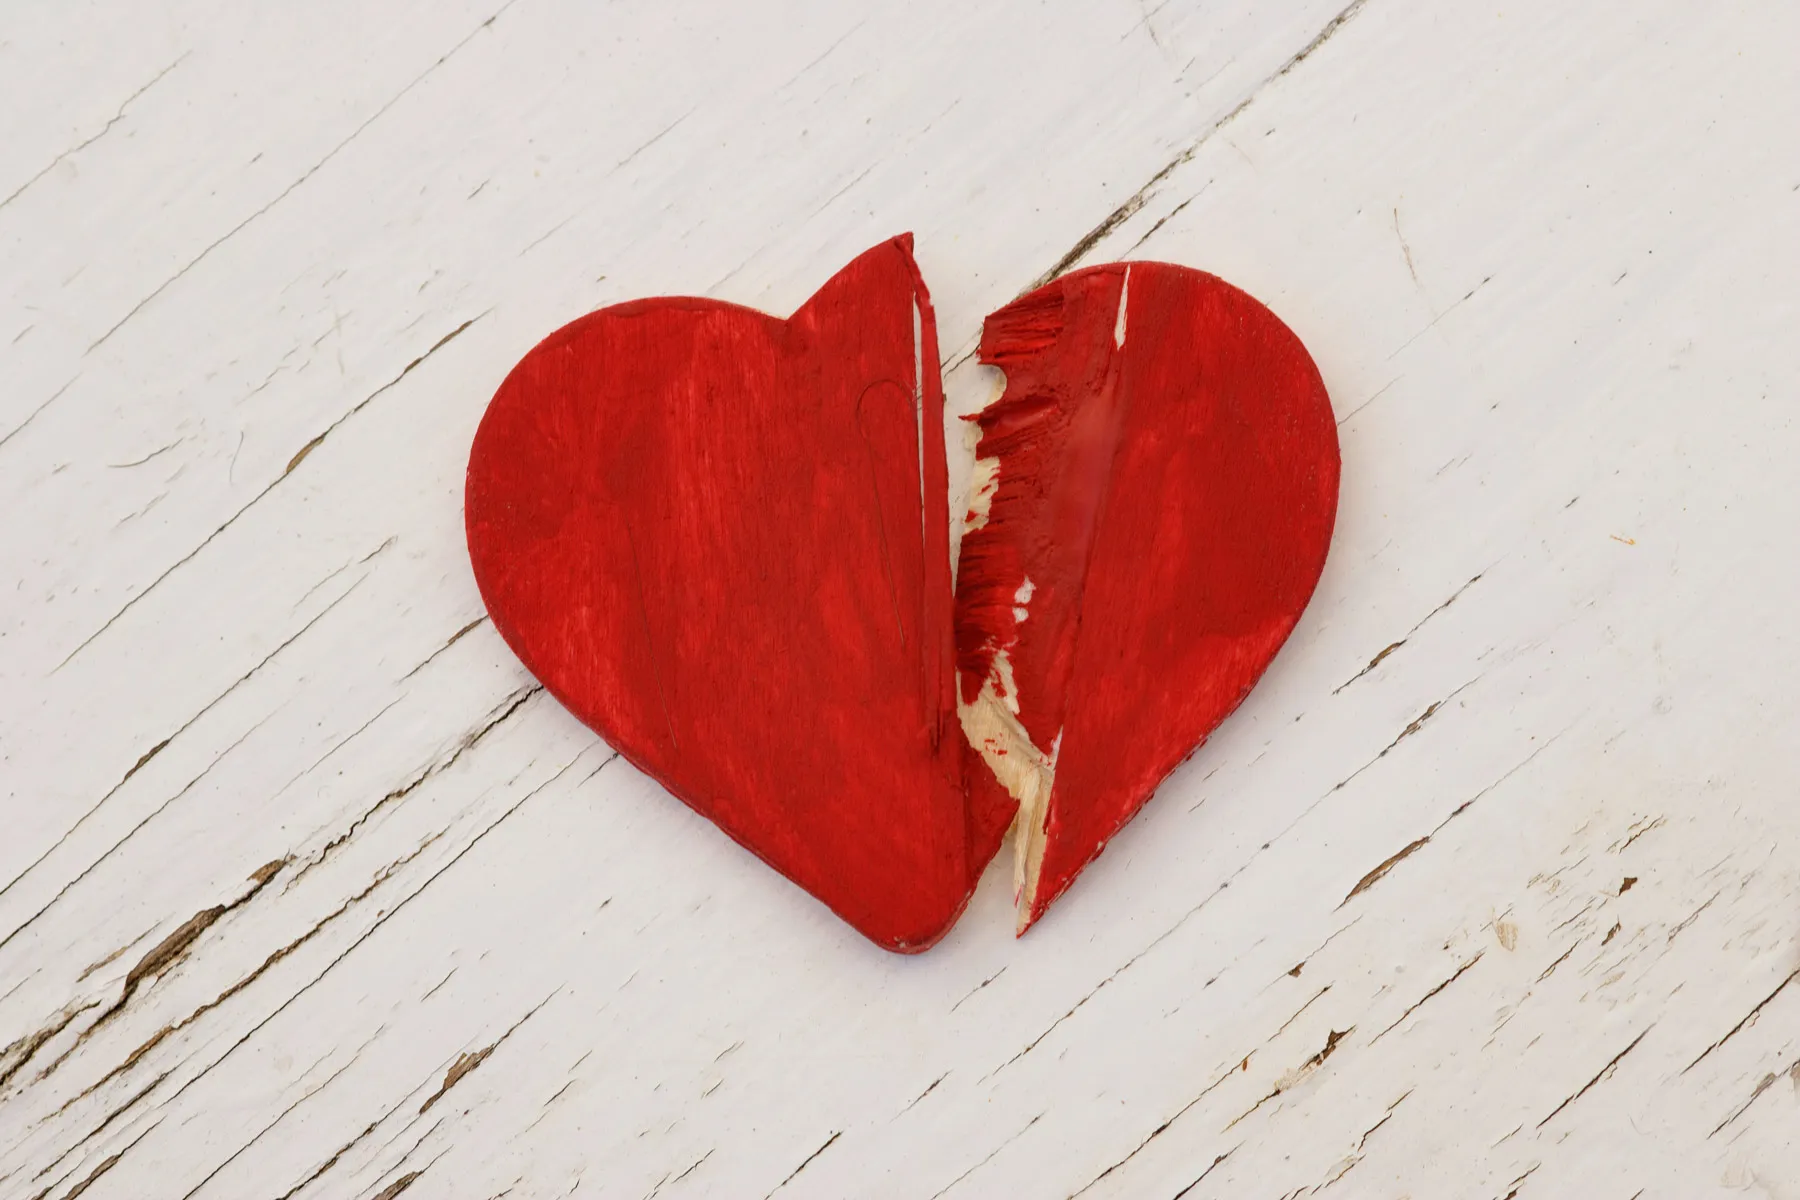 Broken Heart Syndrome: On the Rise, Especially in Women 50-74